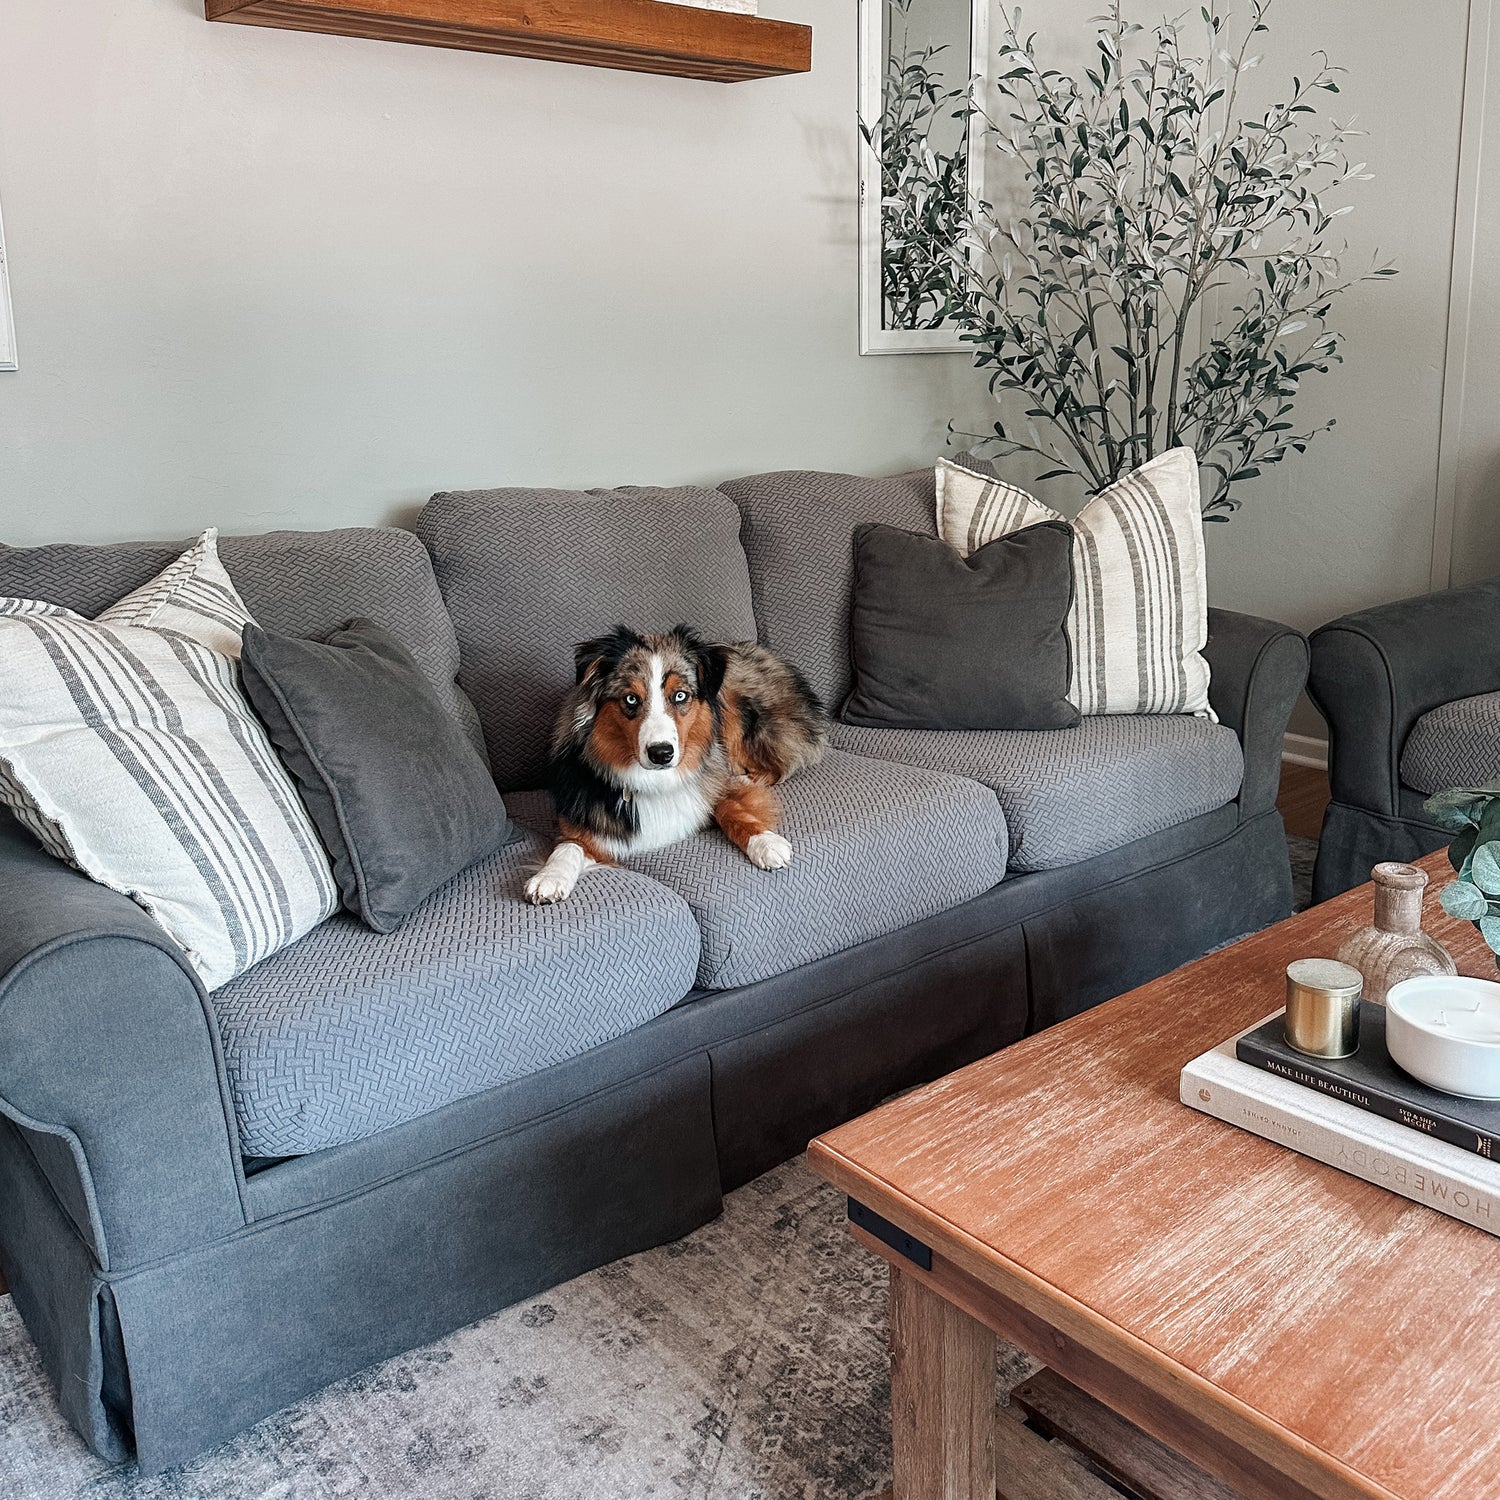 Dog-proofing Your Furniture: How to Protect Your Couch from Your Dog - Nolan Interior